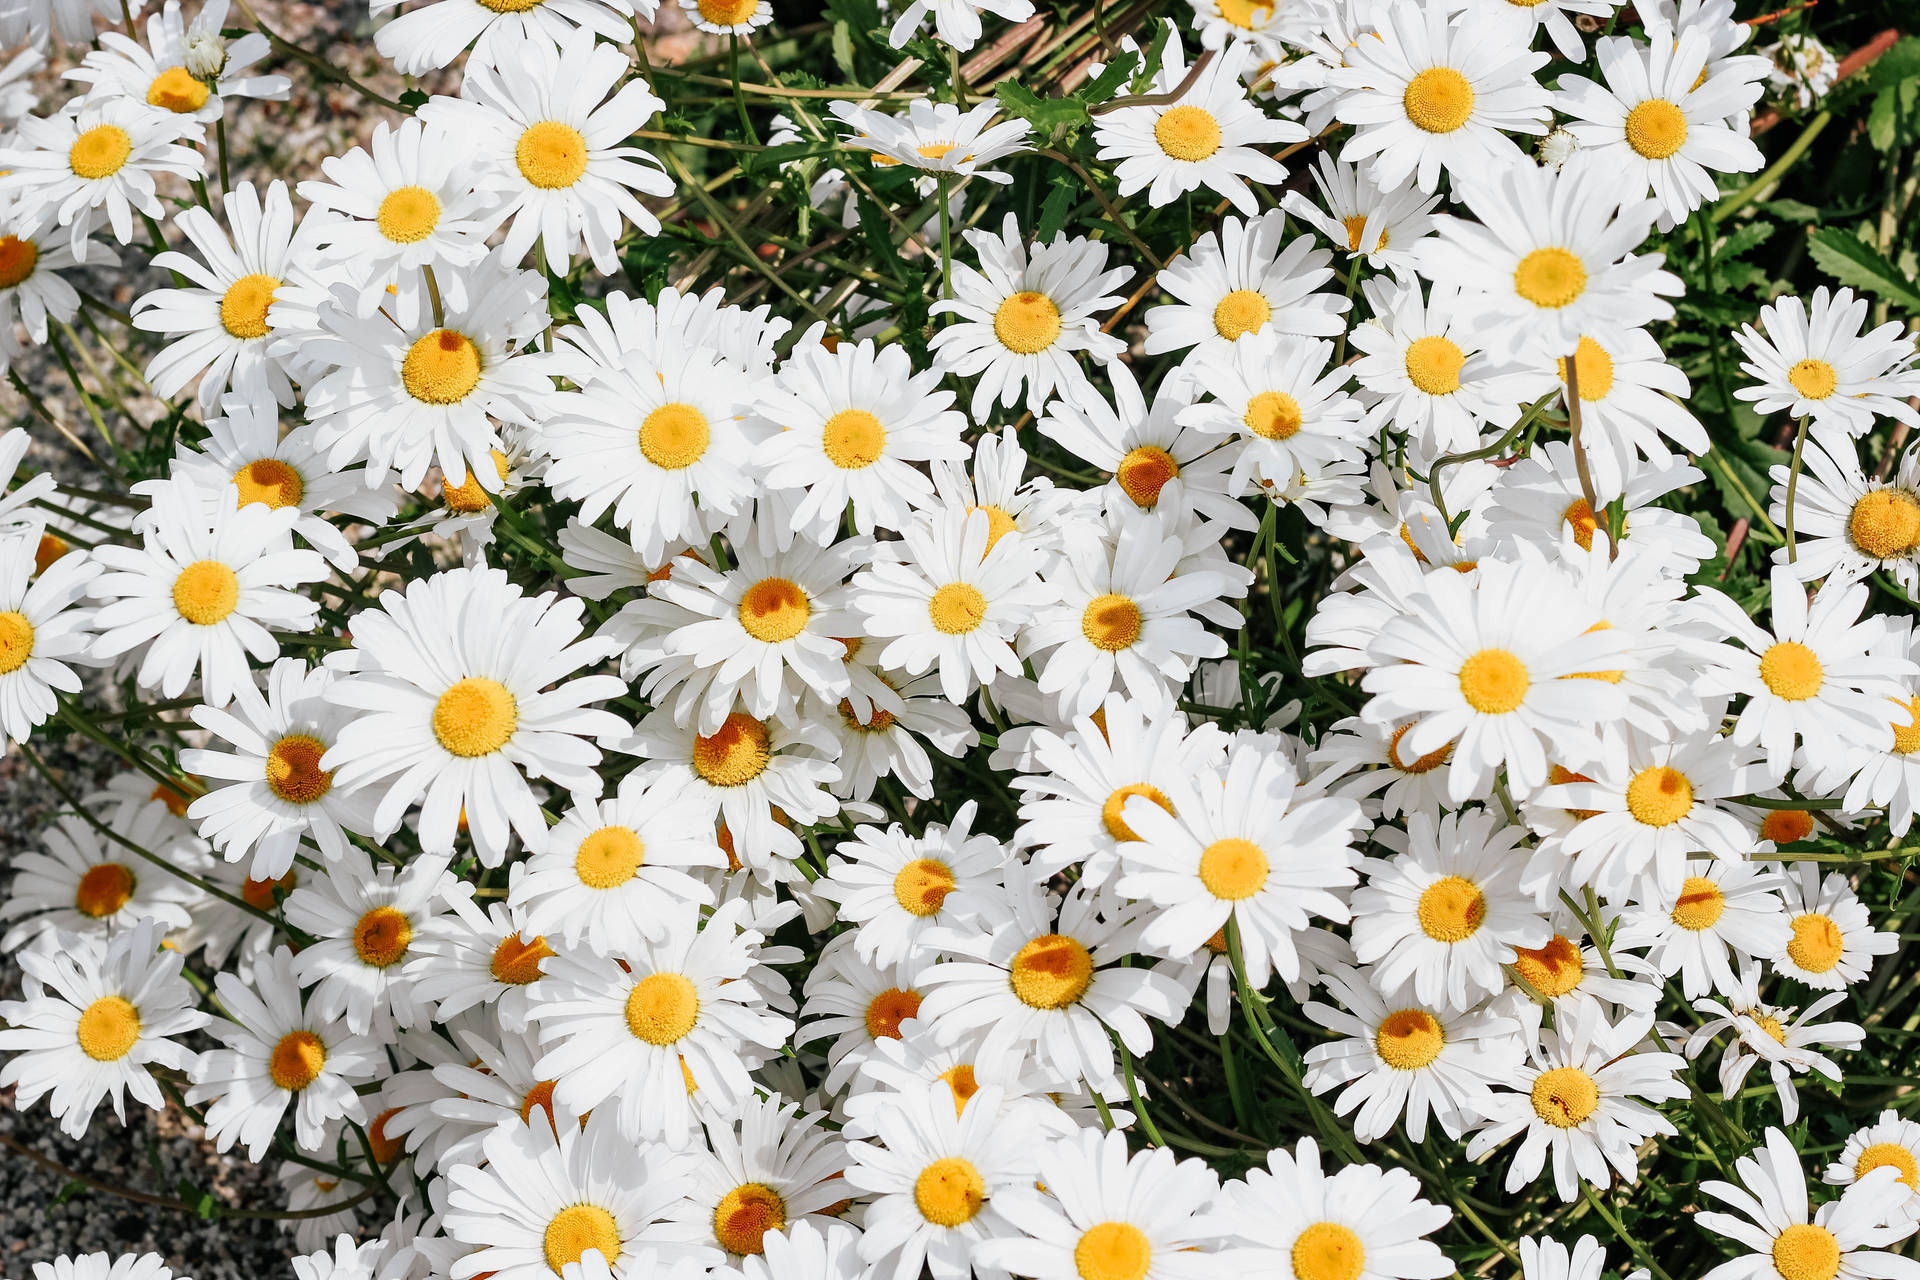 Daisy 5184X3456 Wallpaper and Background Image